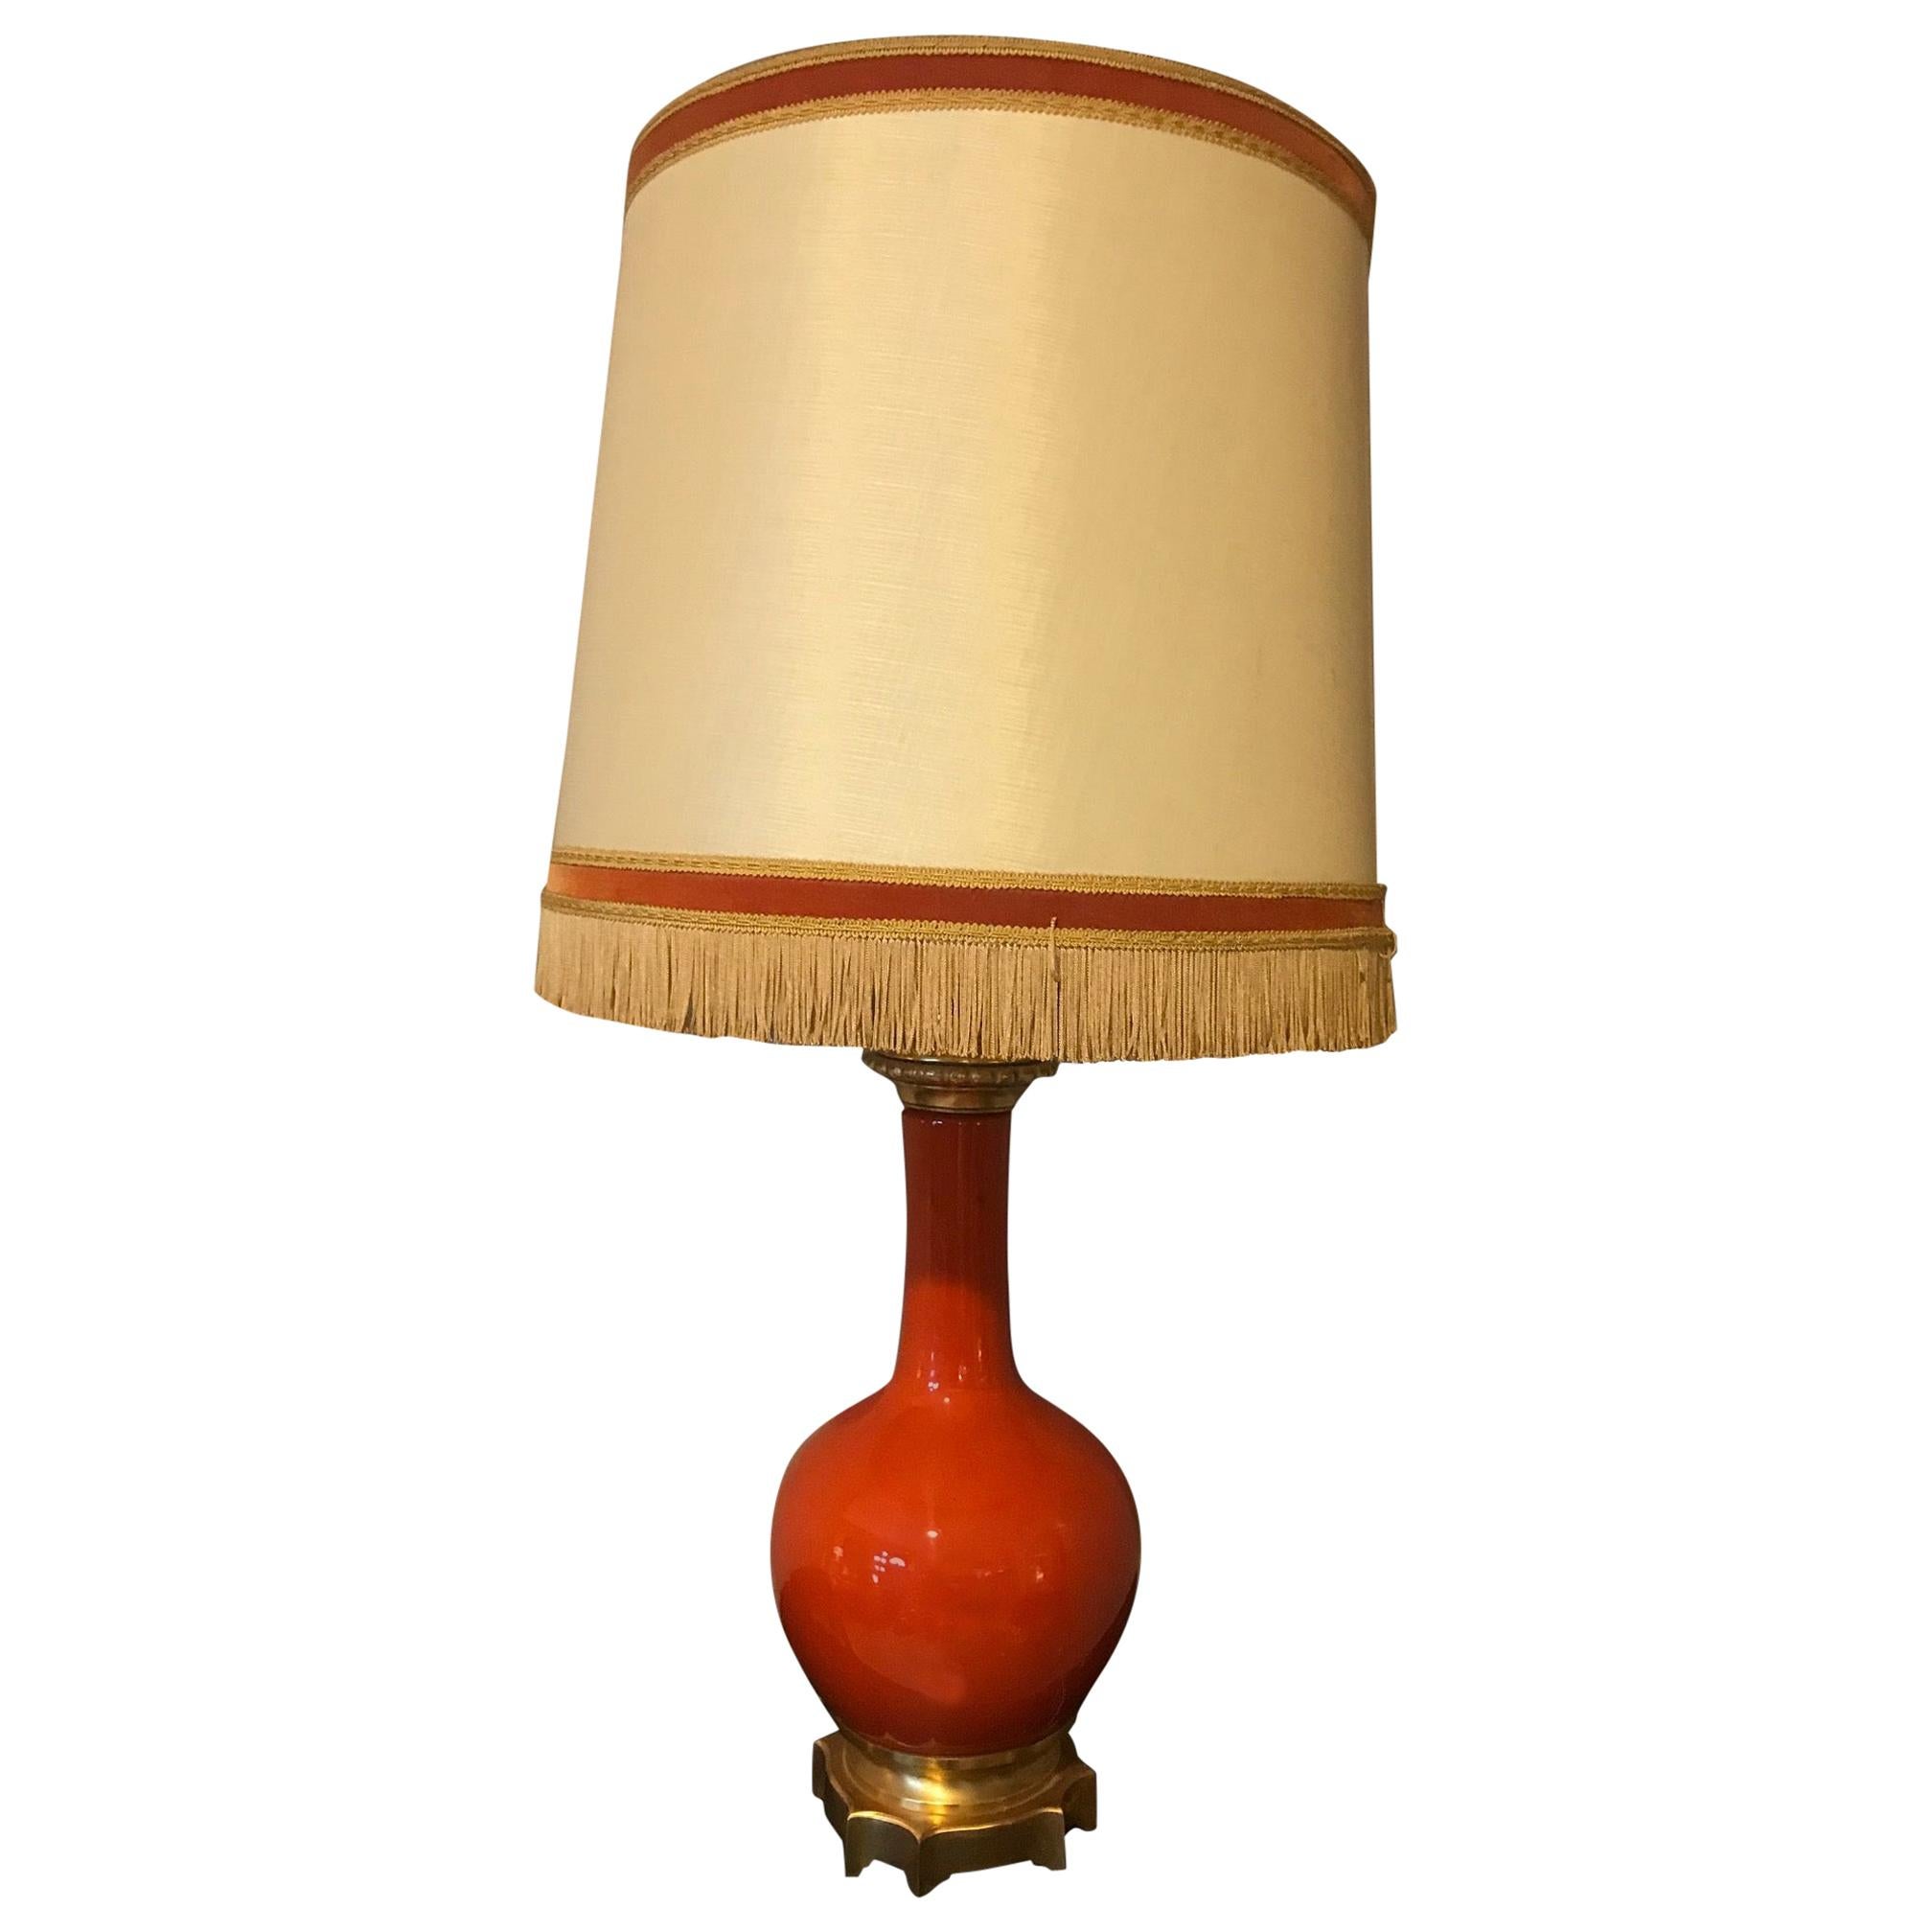 20th Century French Orange Opaline Glass and Brass Table Lamp, 1920s For Sale